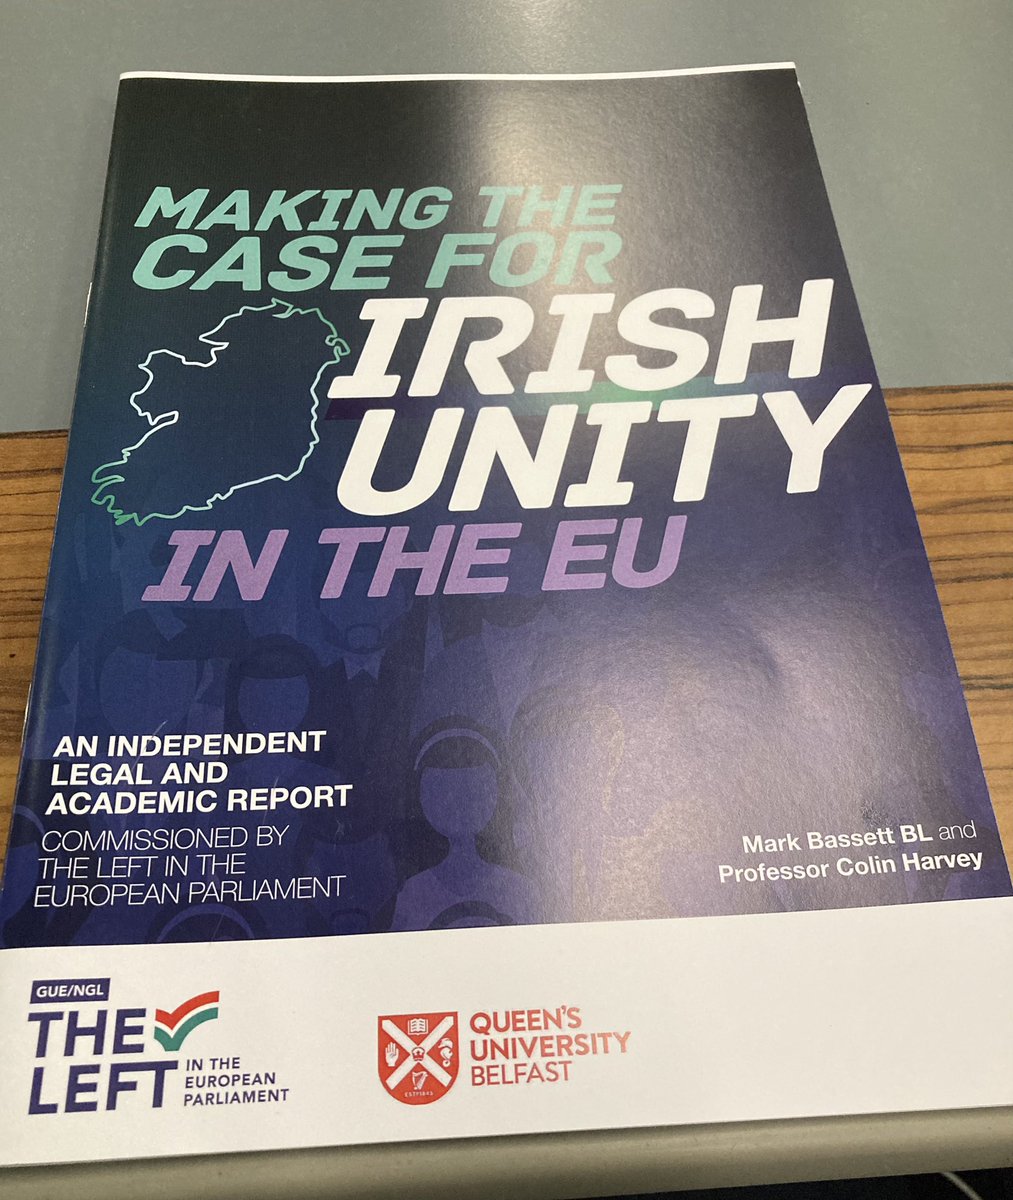 The Dublin launch today confirmed once again the need to discuss the only credible pathway back to the EU for the people of NI. 

A Good Friday Agreement conversation about constitutional change. #Agreement25